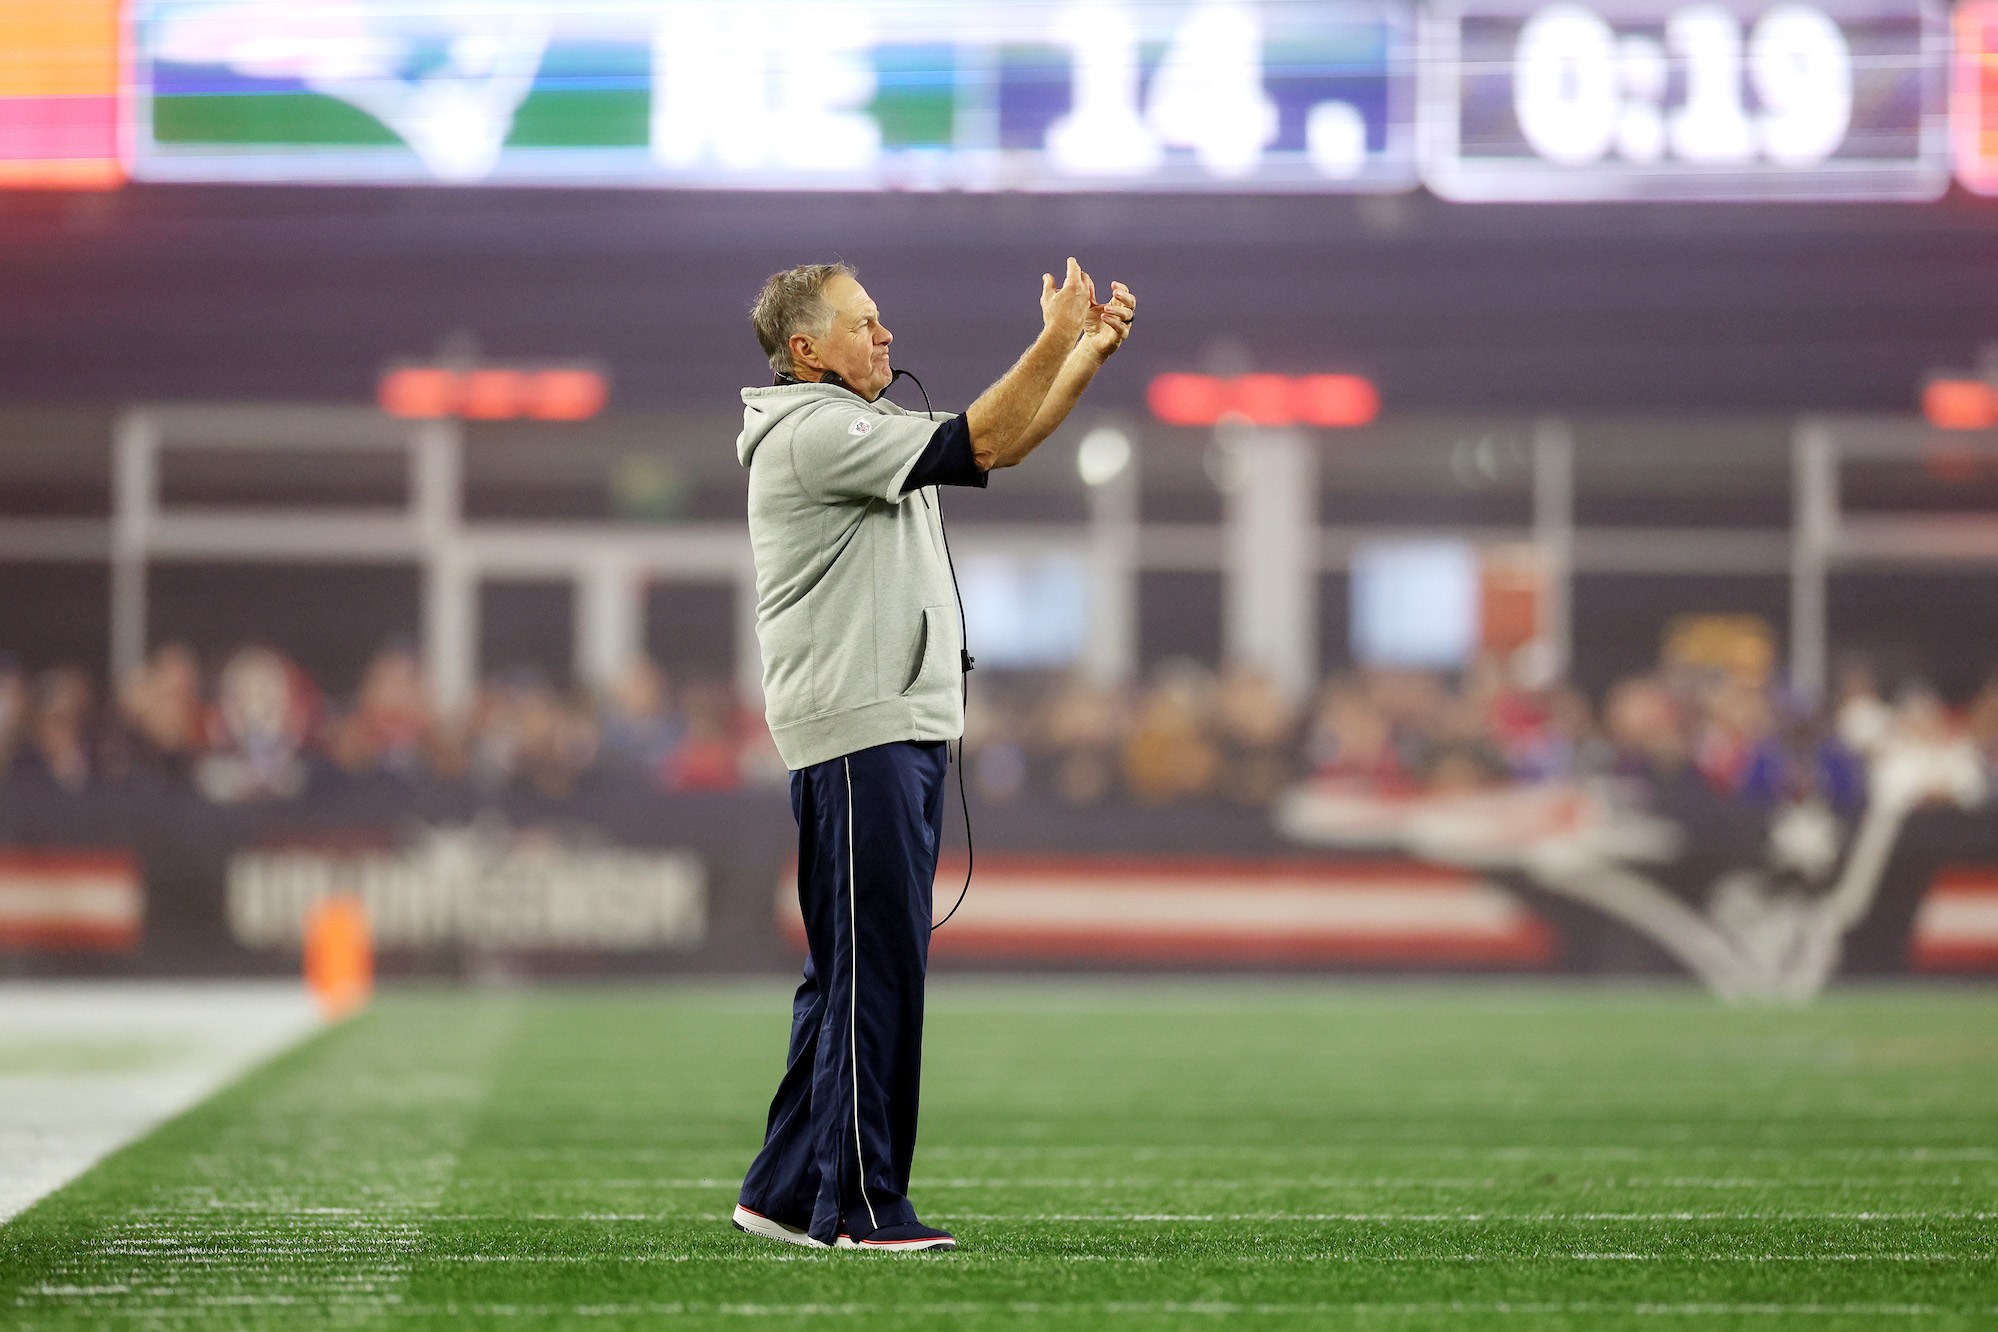 FOXBOROUGH, MASSACHUSETTS - OCTOBER 24: Head coach Bill Belichick of the New England Patriots reacts during the first half against the Chicago Bears at Gillette Stadium on October 24, 2022 in Foxborough, Massachusetts. (Photo by Maddie Meyer/Getty Images)